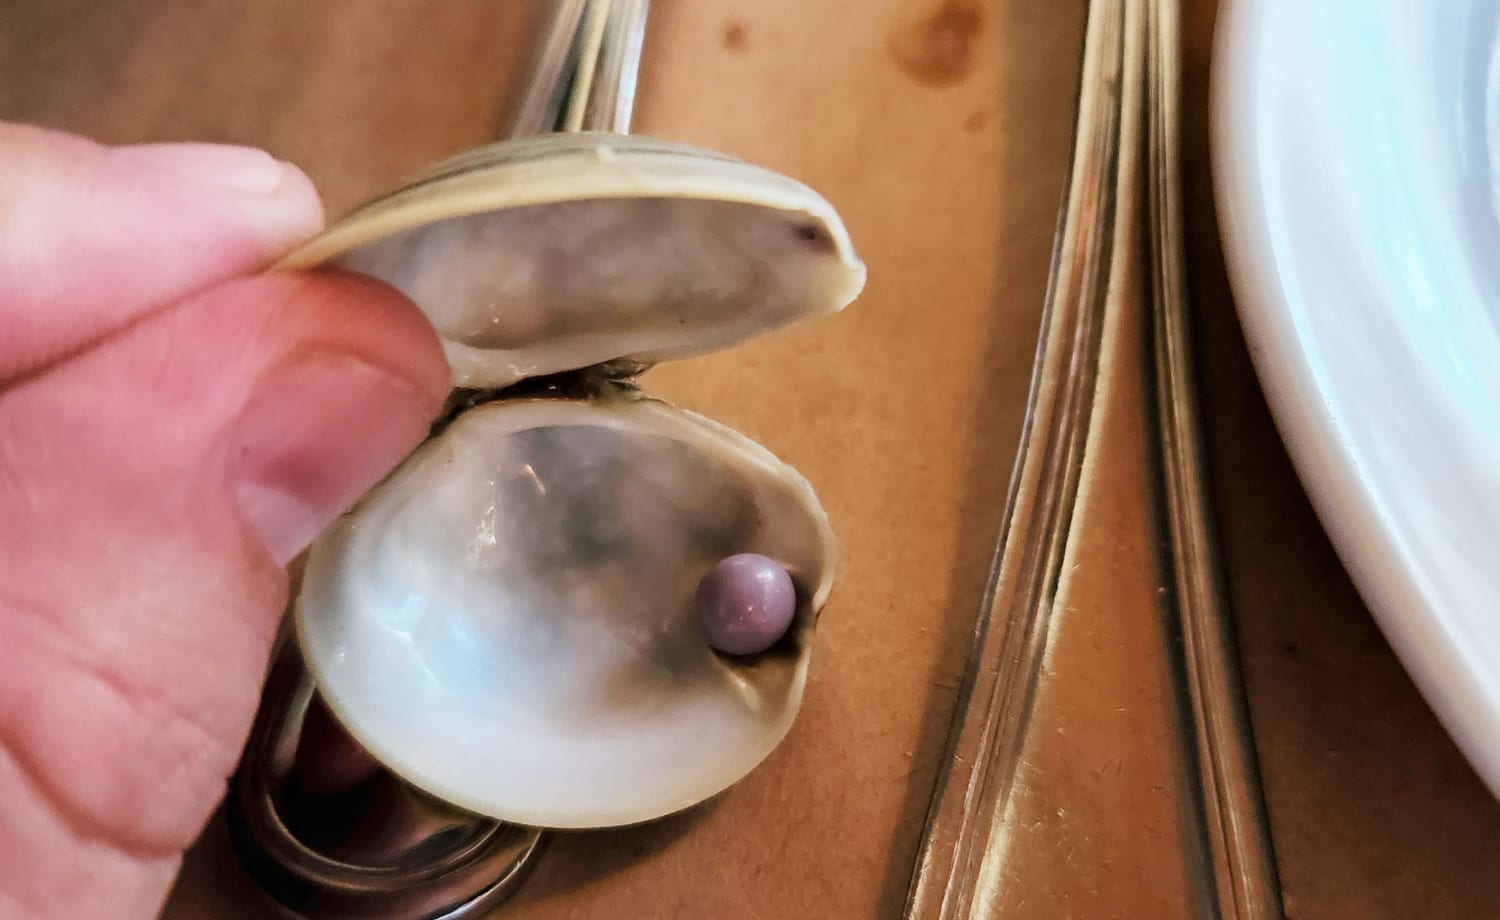 giant clam pearl price